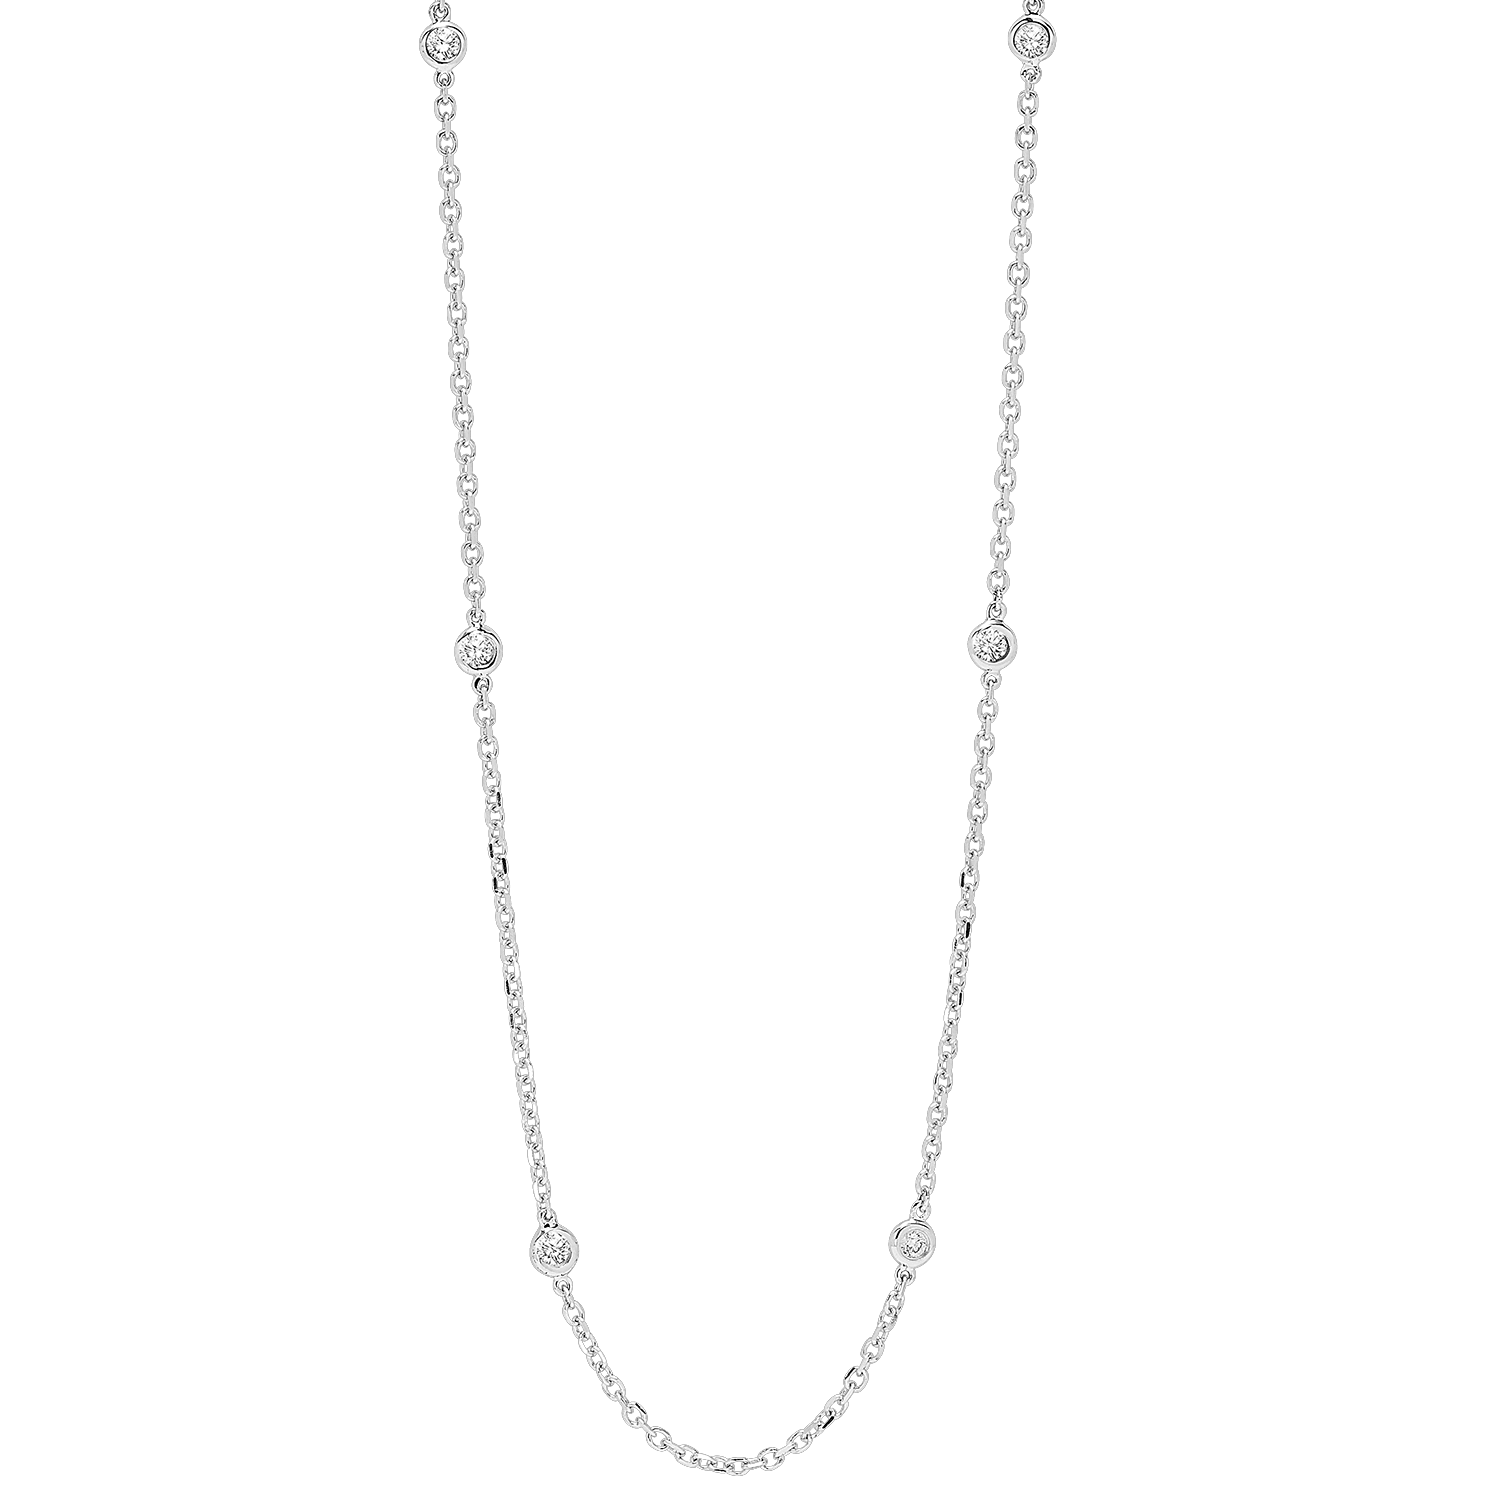 BW James Jewelers Necklace 16 Page Christmas Catalog Offer 14KTW Diamond D.B.T.Y Fashion Necklace 1/4Ct